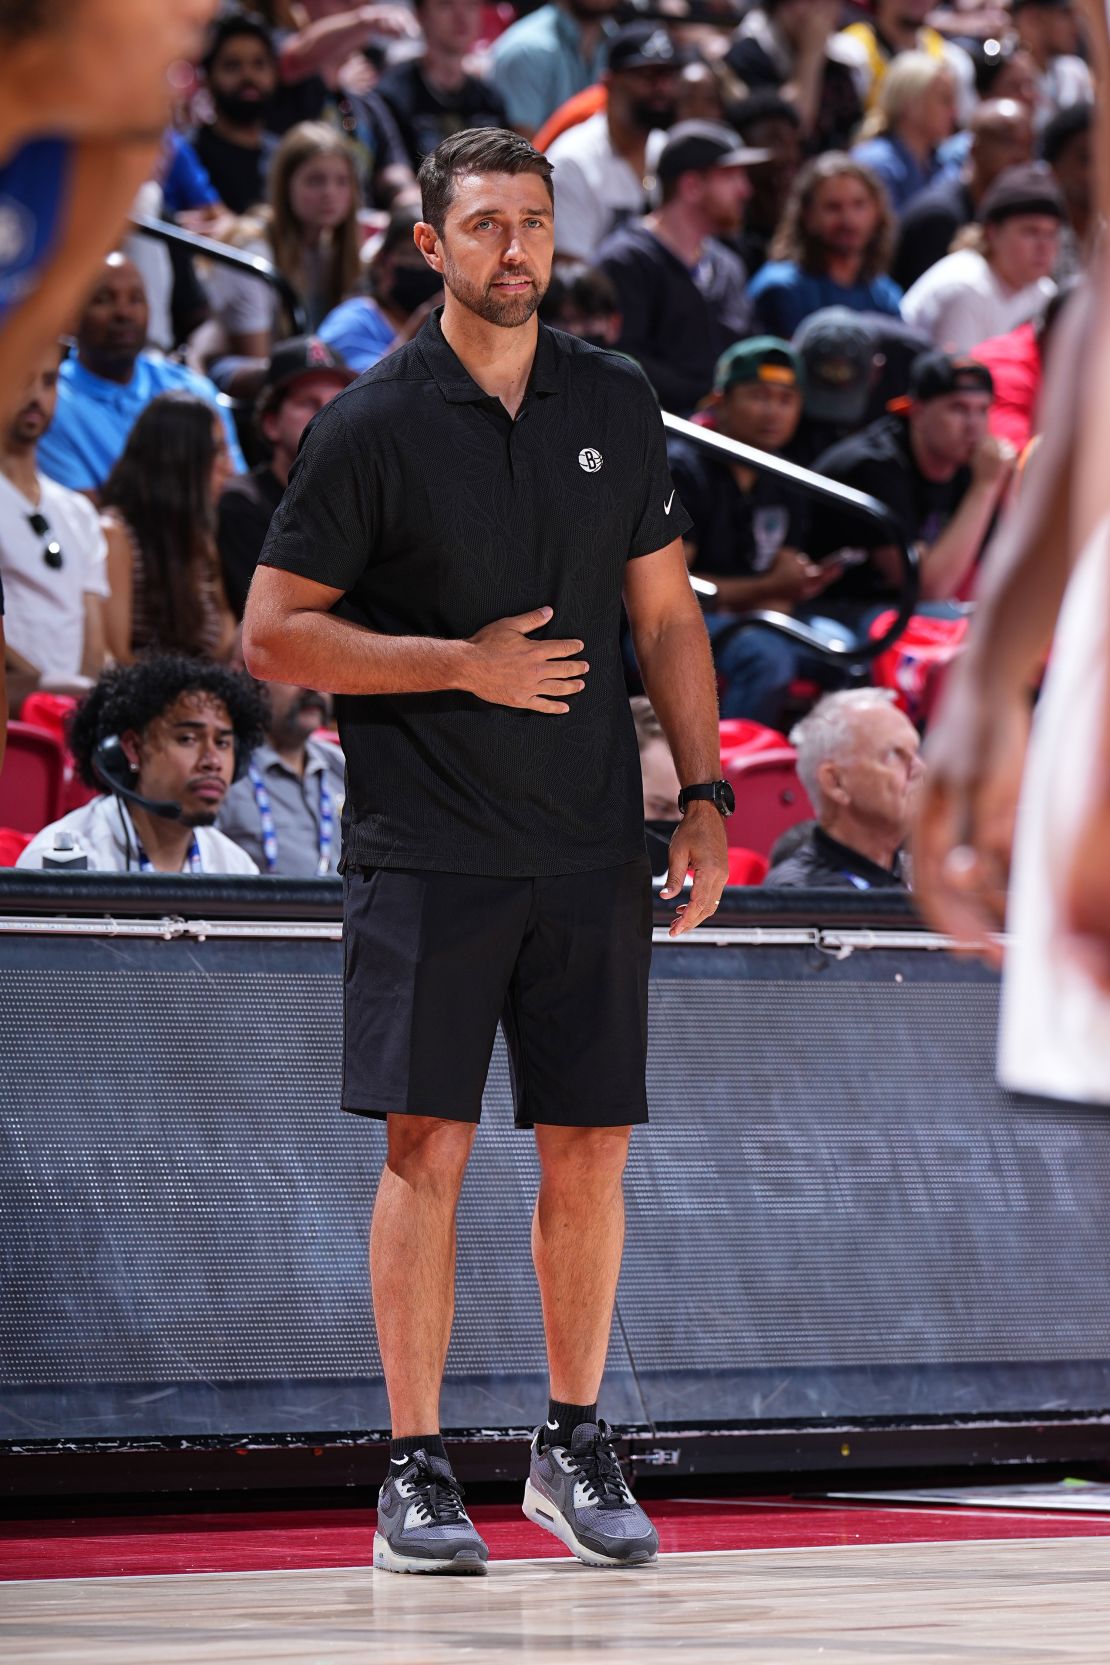 Adam Caporn, now assistant coach of the Brooklyn Nets, was the first Aussie to be recruited to the college by Bennett and paved the way for many more to follow in his footsteps.